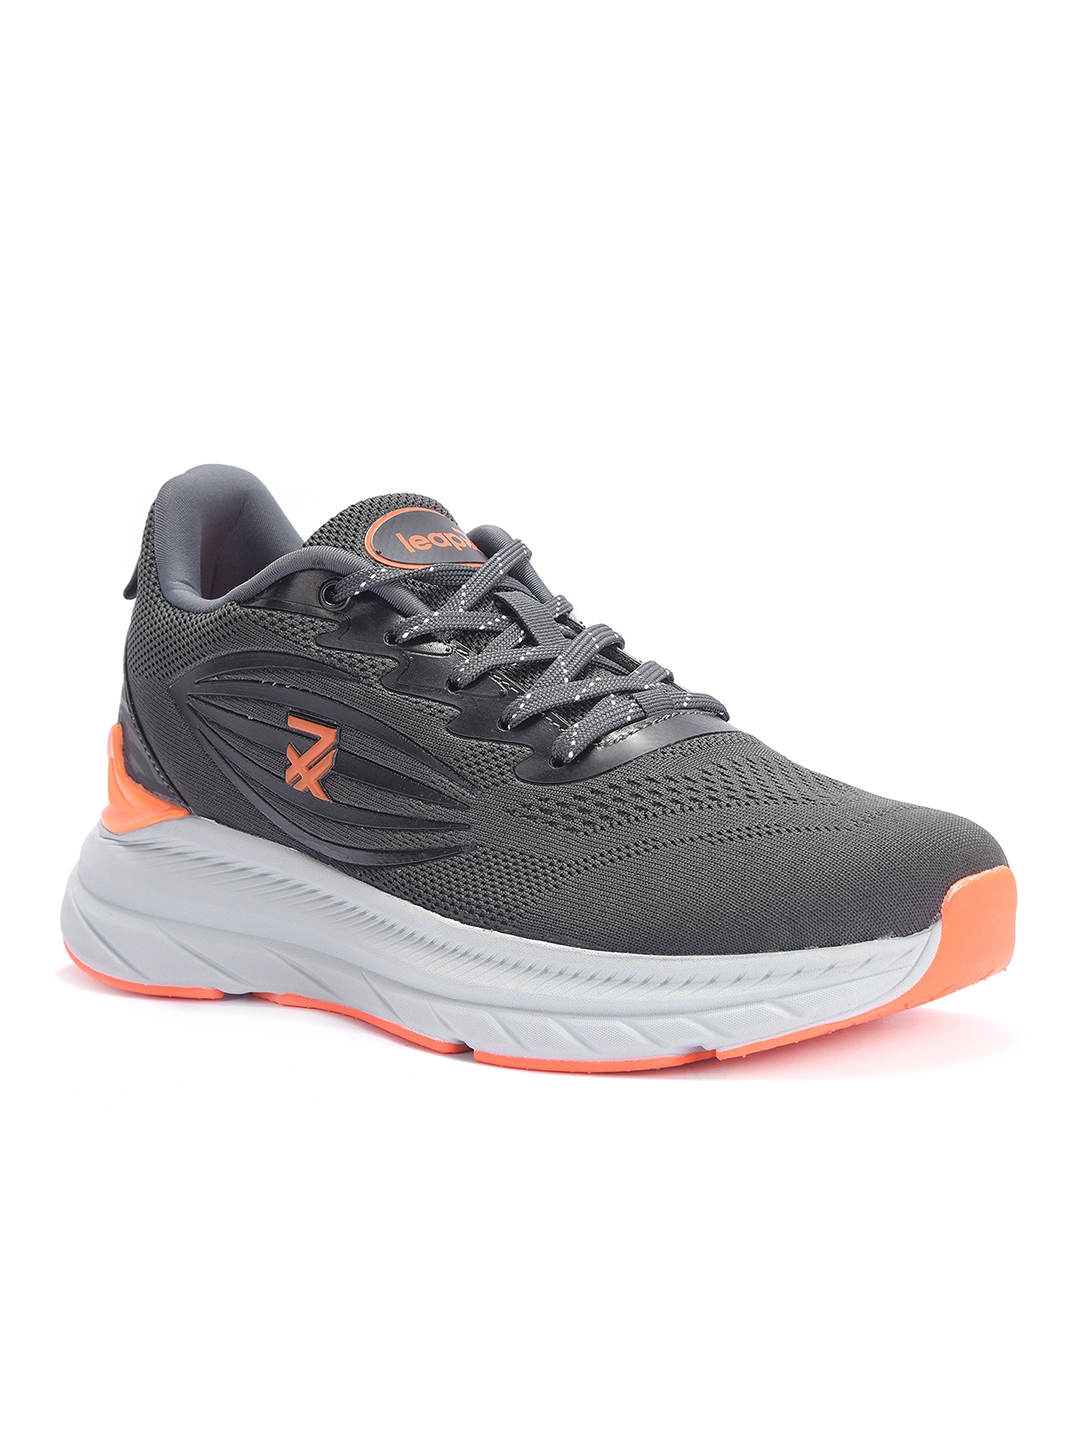 LEAP7X by Liberty RW-02 D.Grey Sports Shoes for Men